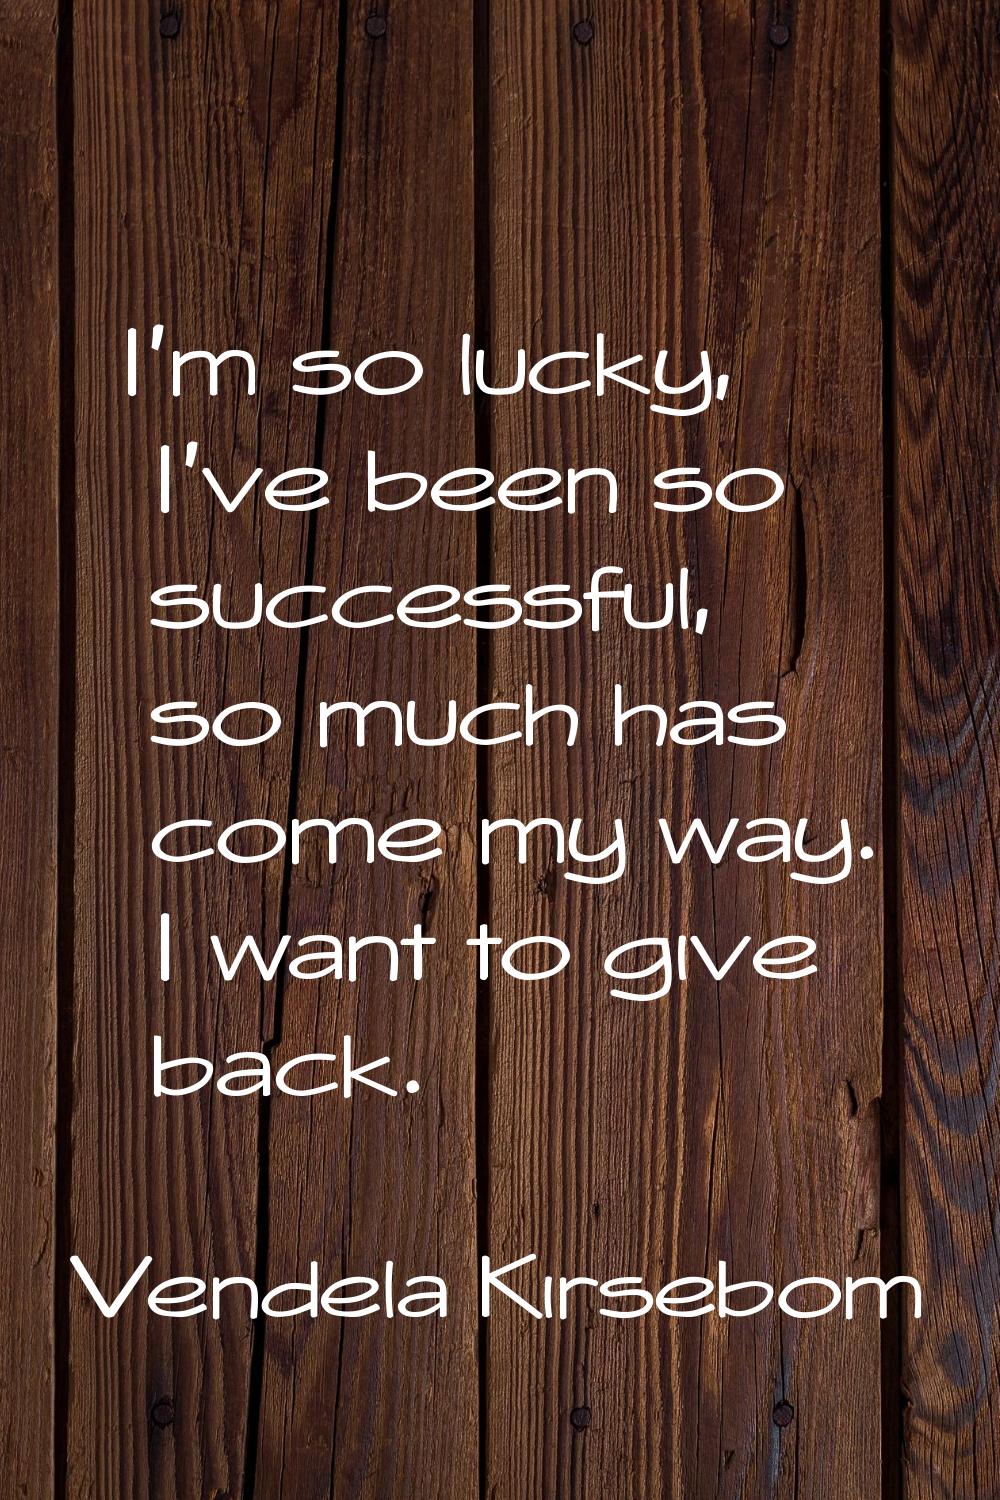 I'm so lucky, I've been so successful, so much has come my way. I want to give back.